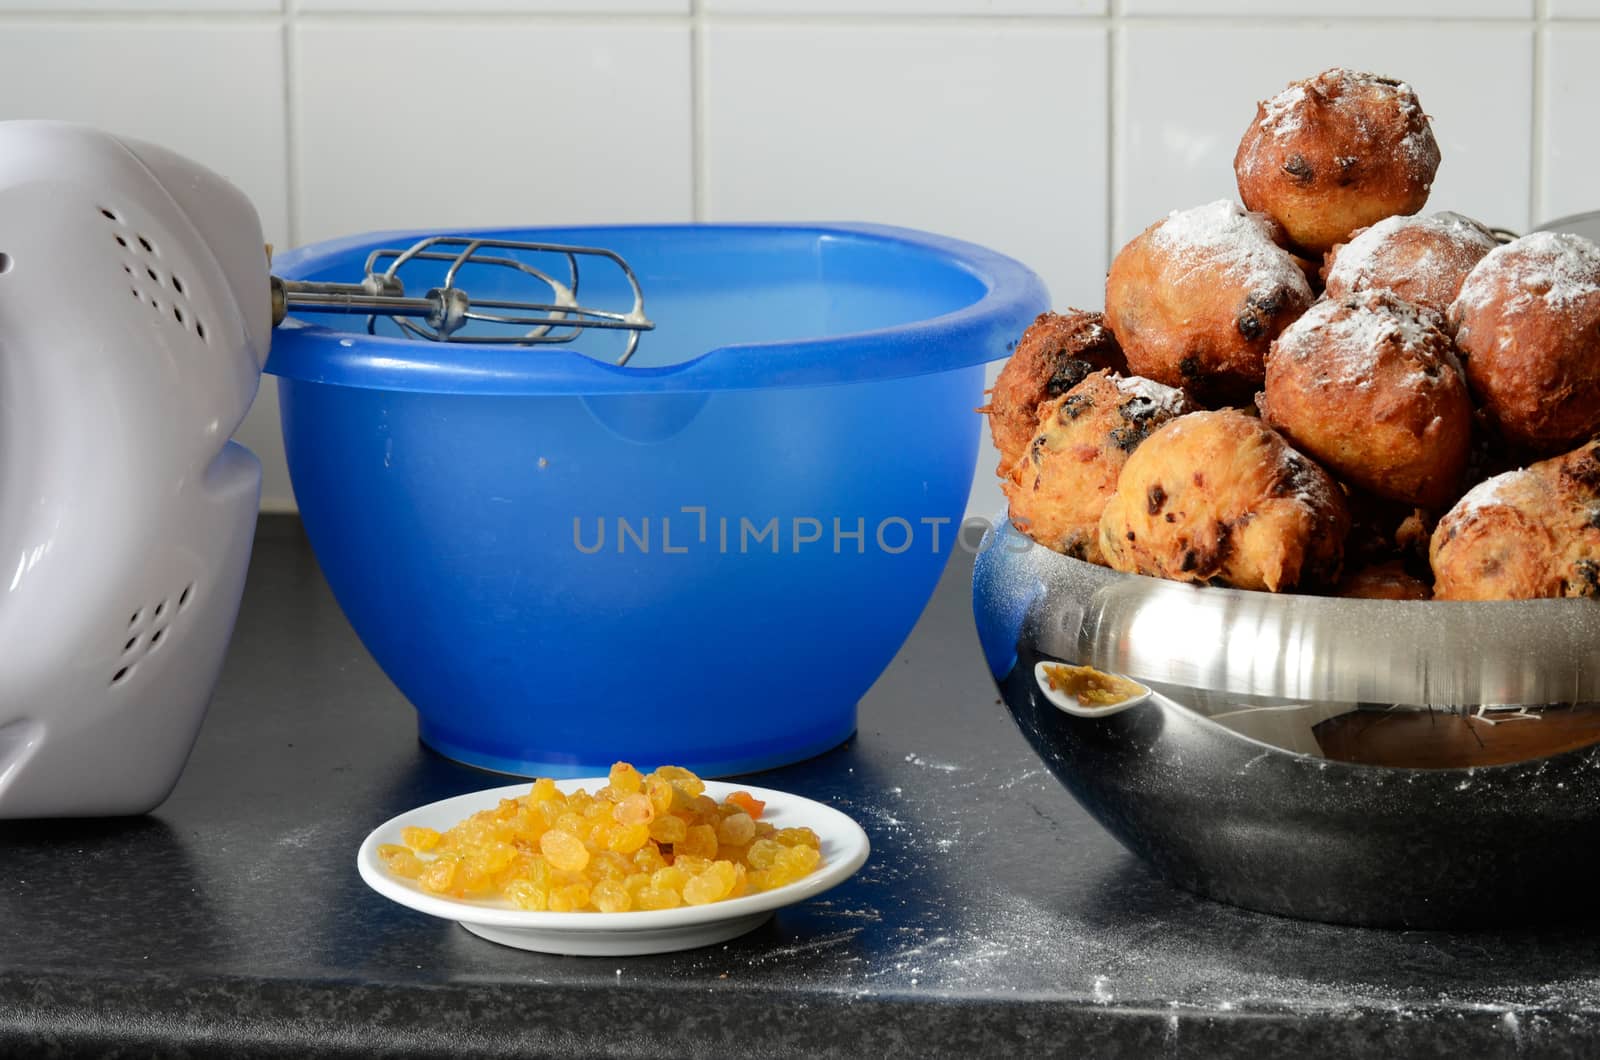 Ingredients like raisins and a hand mixer for baking oliebollen, oil balls or donut balls, a dutch pastry traditionally eaten on New Year’s Eve in the Netherlands. 
